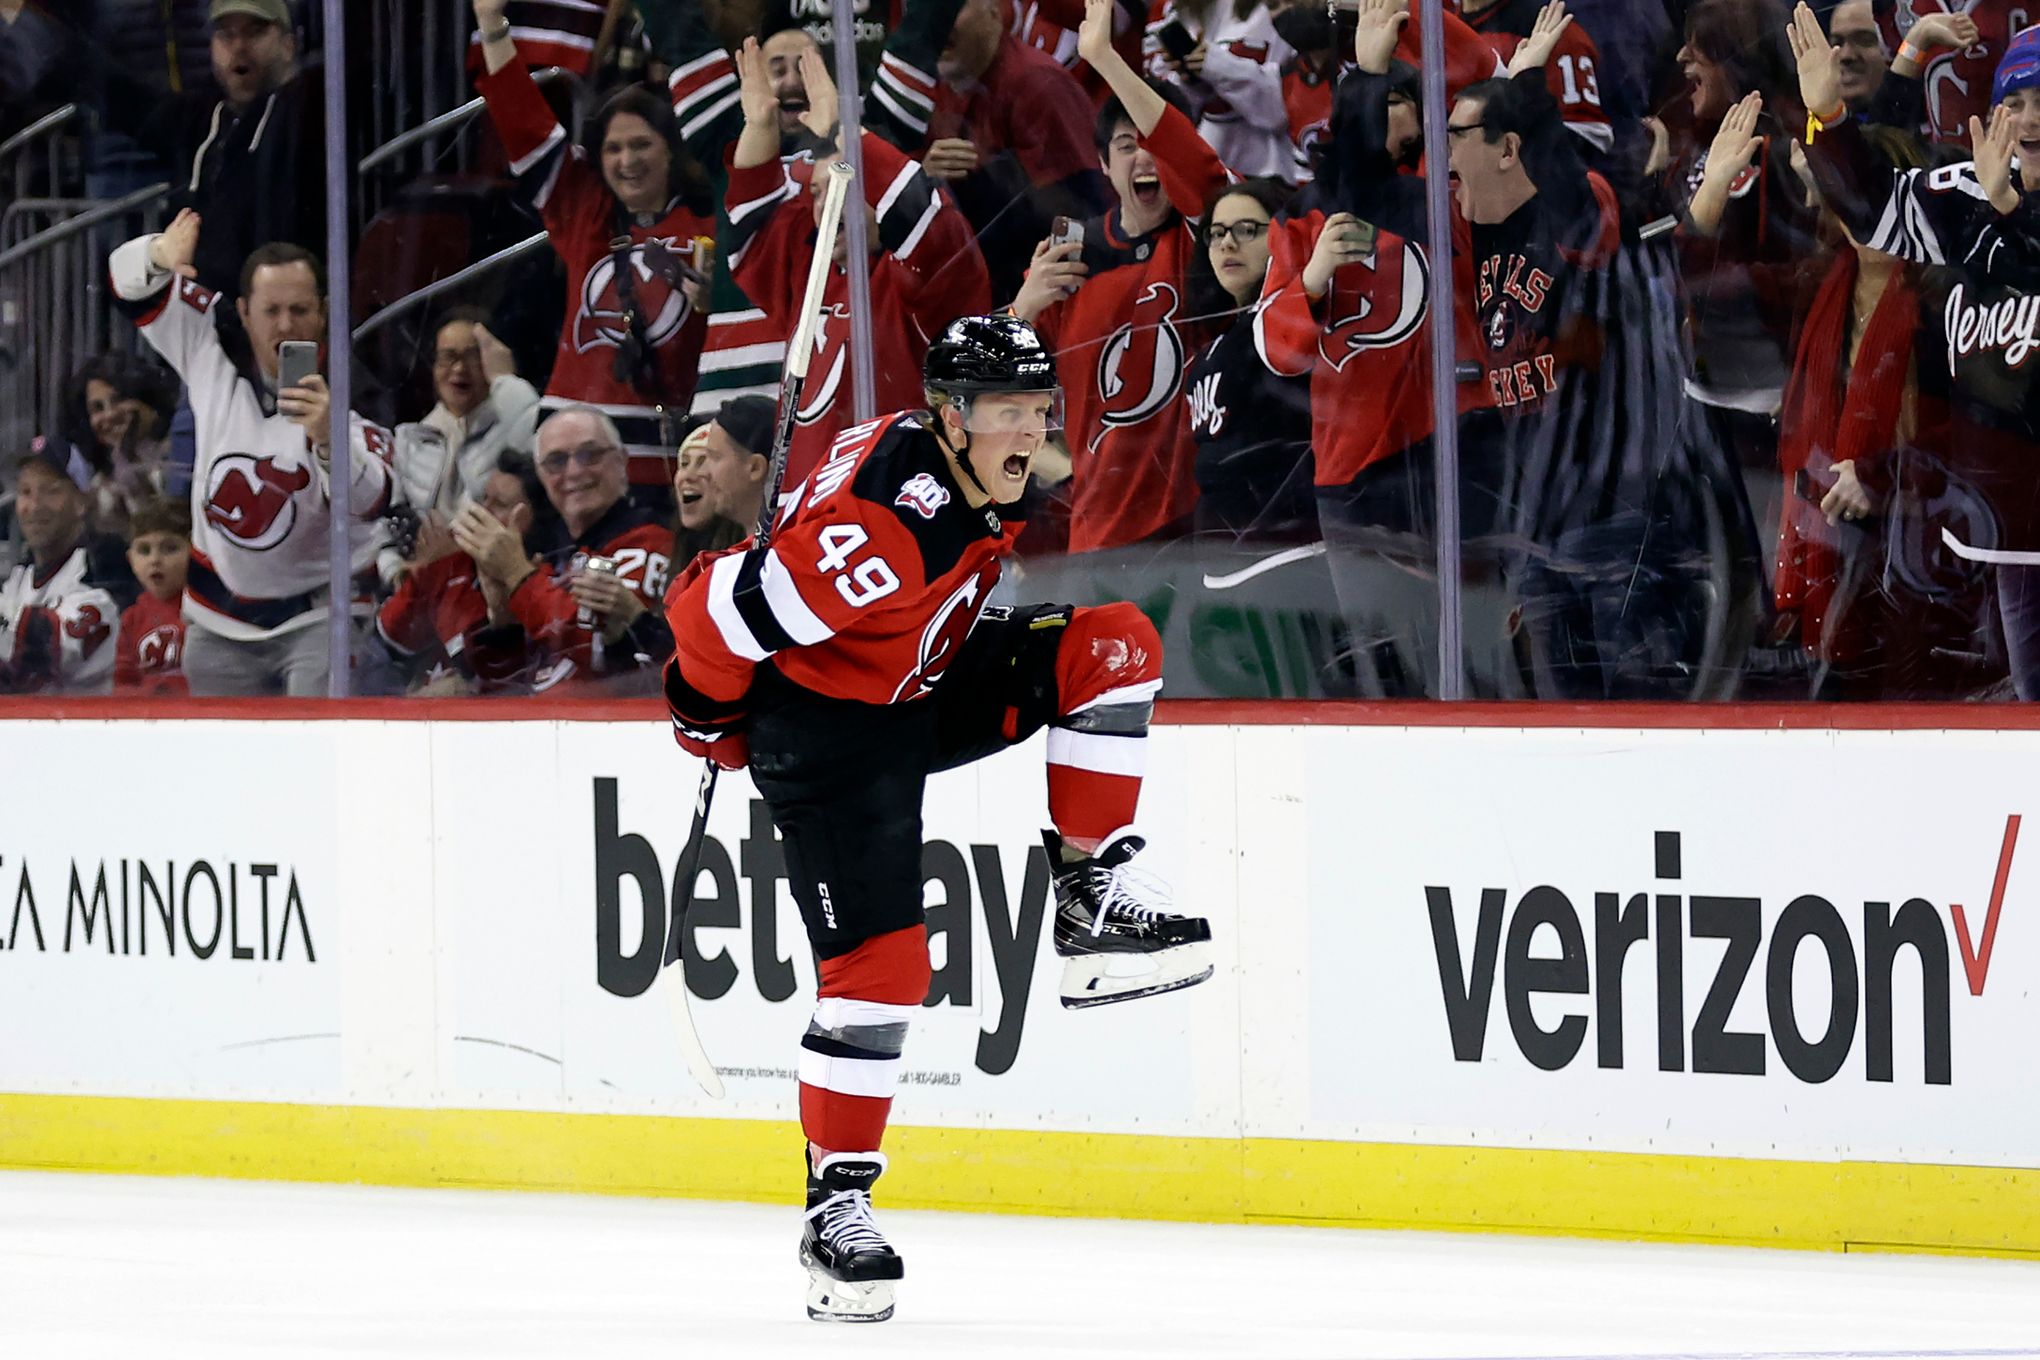 Hughes has first NHL hat trick, Devils beat Capitals 5-1 - Seattle Sports